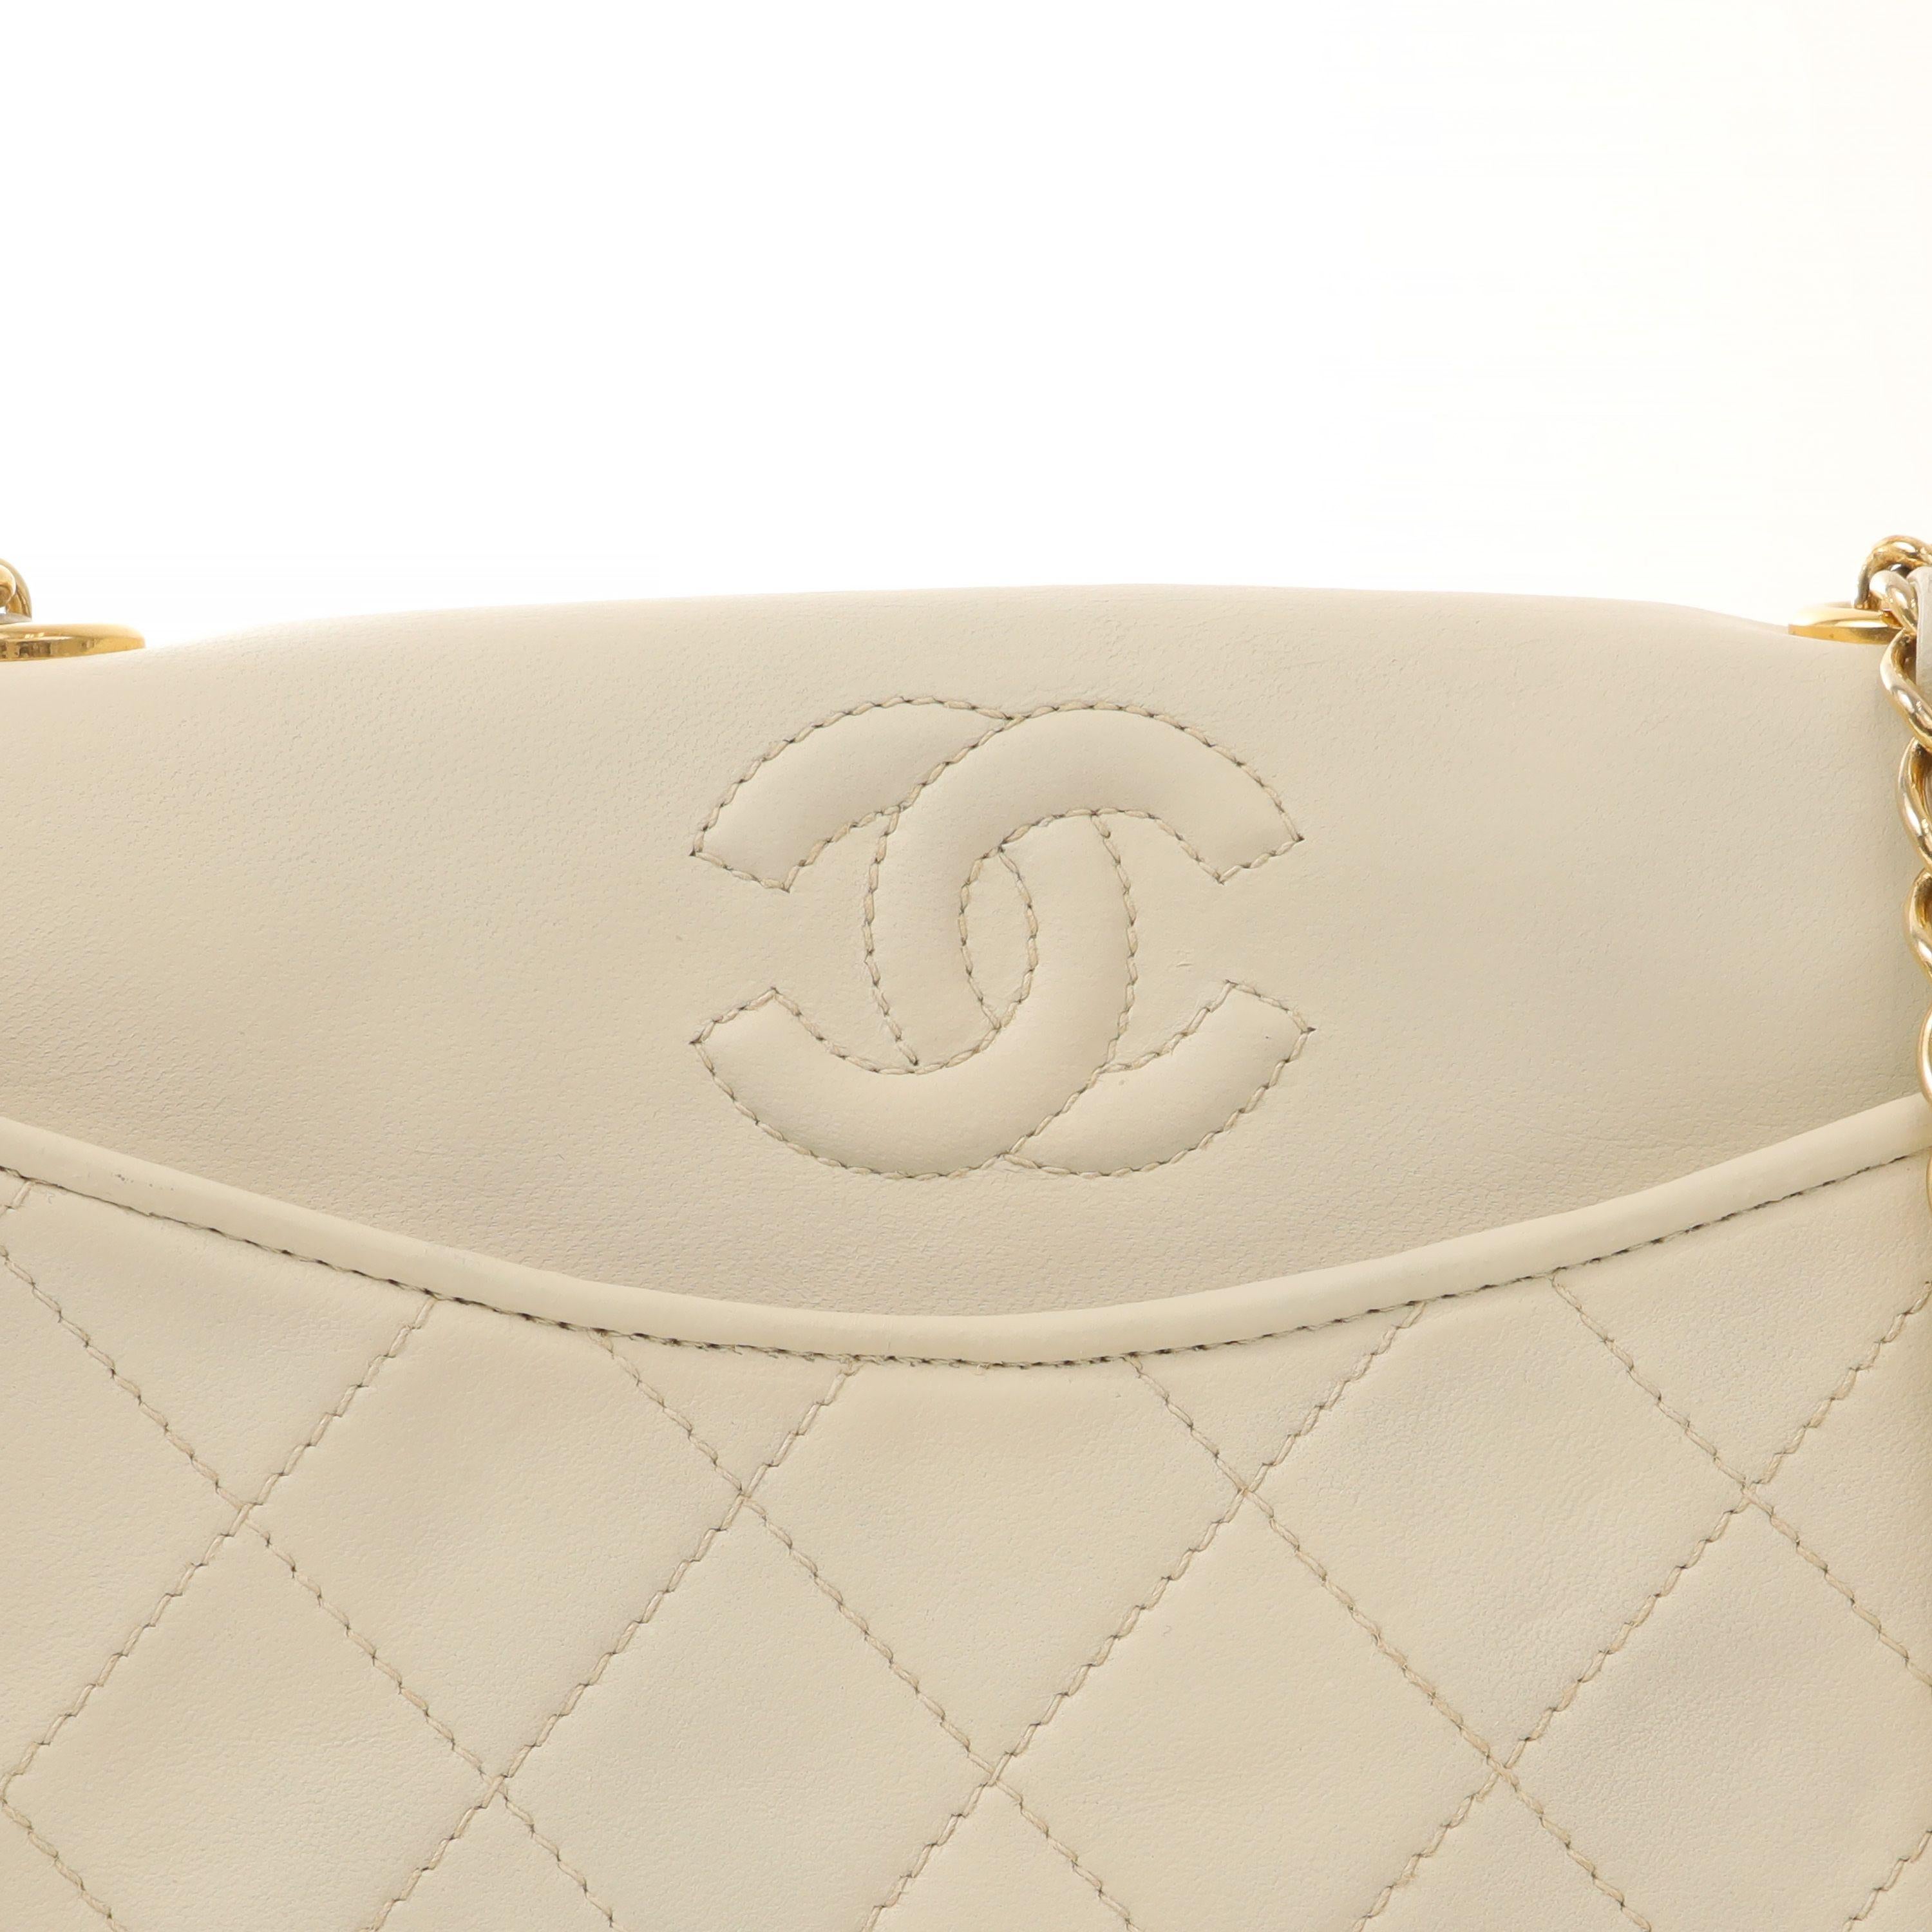 This authentic Chanel Ivory Lambskin Crossbody Bag is in beautiful vintage condition.  Soft ivory lambskin small bag has a quilted front panel.  Gold tone leather and chain entwined strap.  Dust bag included.

PBF 13961